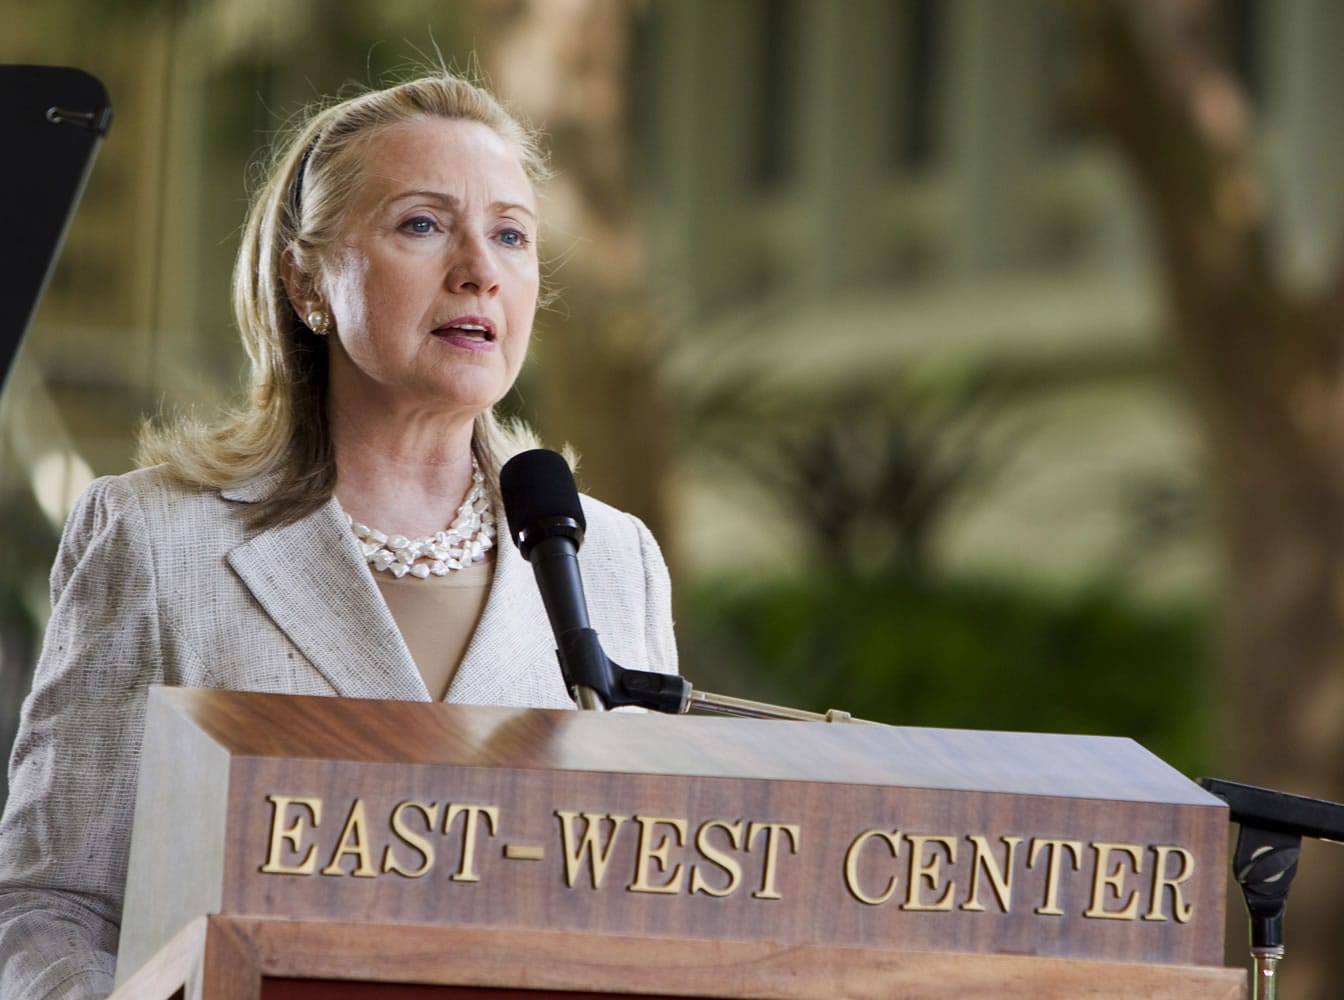 Then-Secretary of State Hillary Rodham Clinton gives a speech at the East West Center on the campus of the University of Hawaii on Nov. 10, 2011 in Honolulu as she attends the APEC Summit on Oahu.